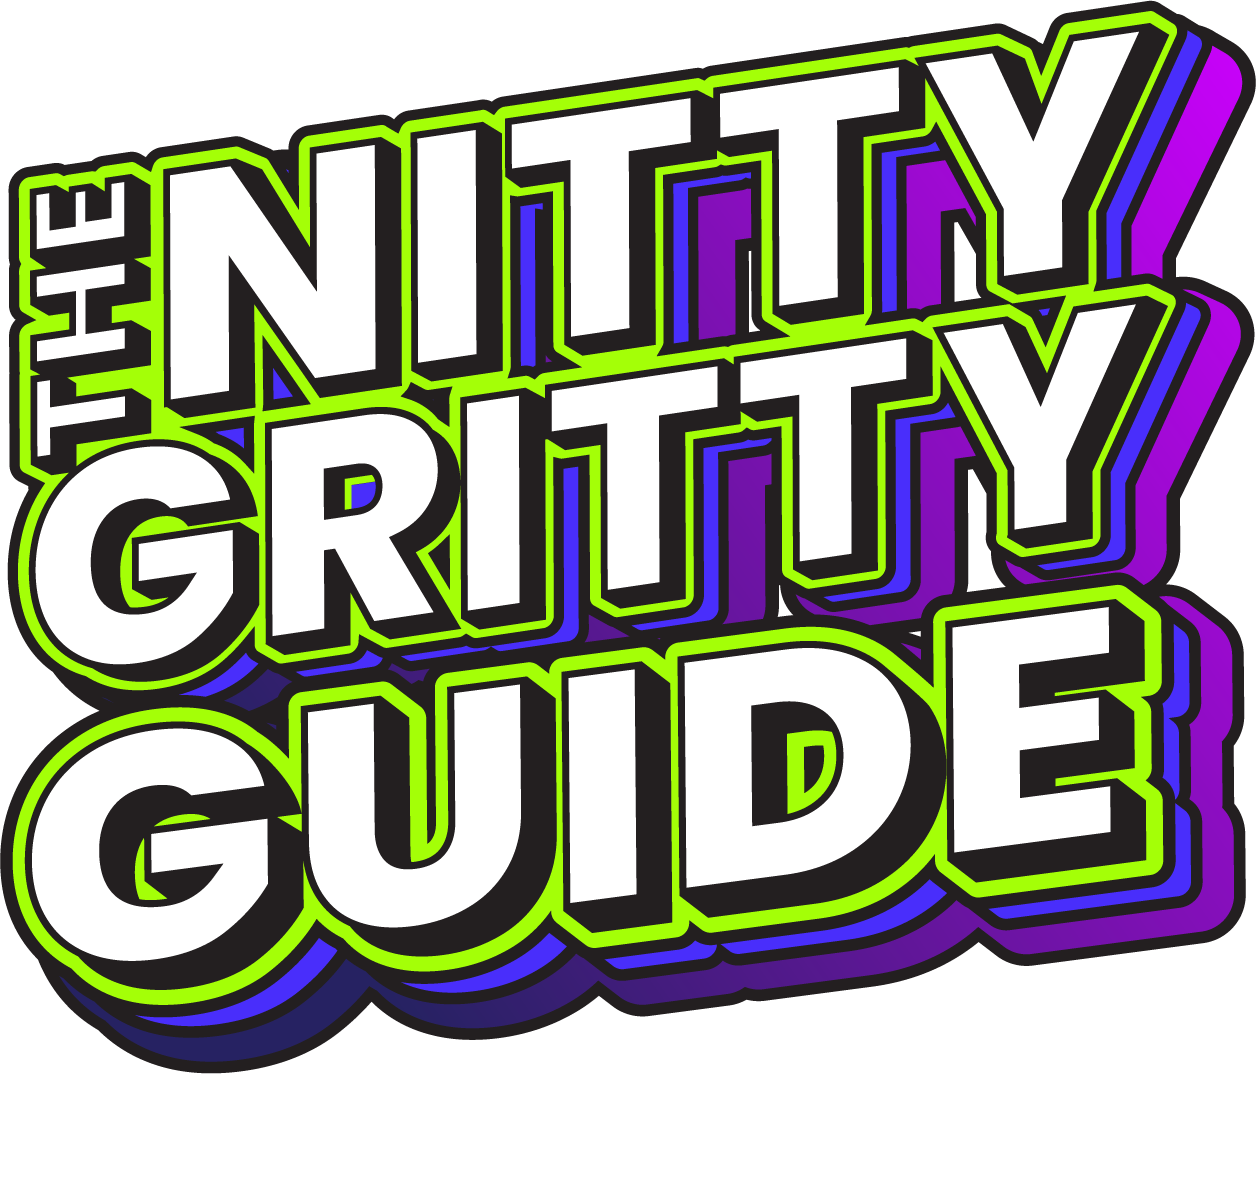 The_Nitty_gritty_guide_logo